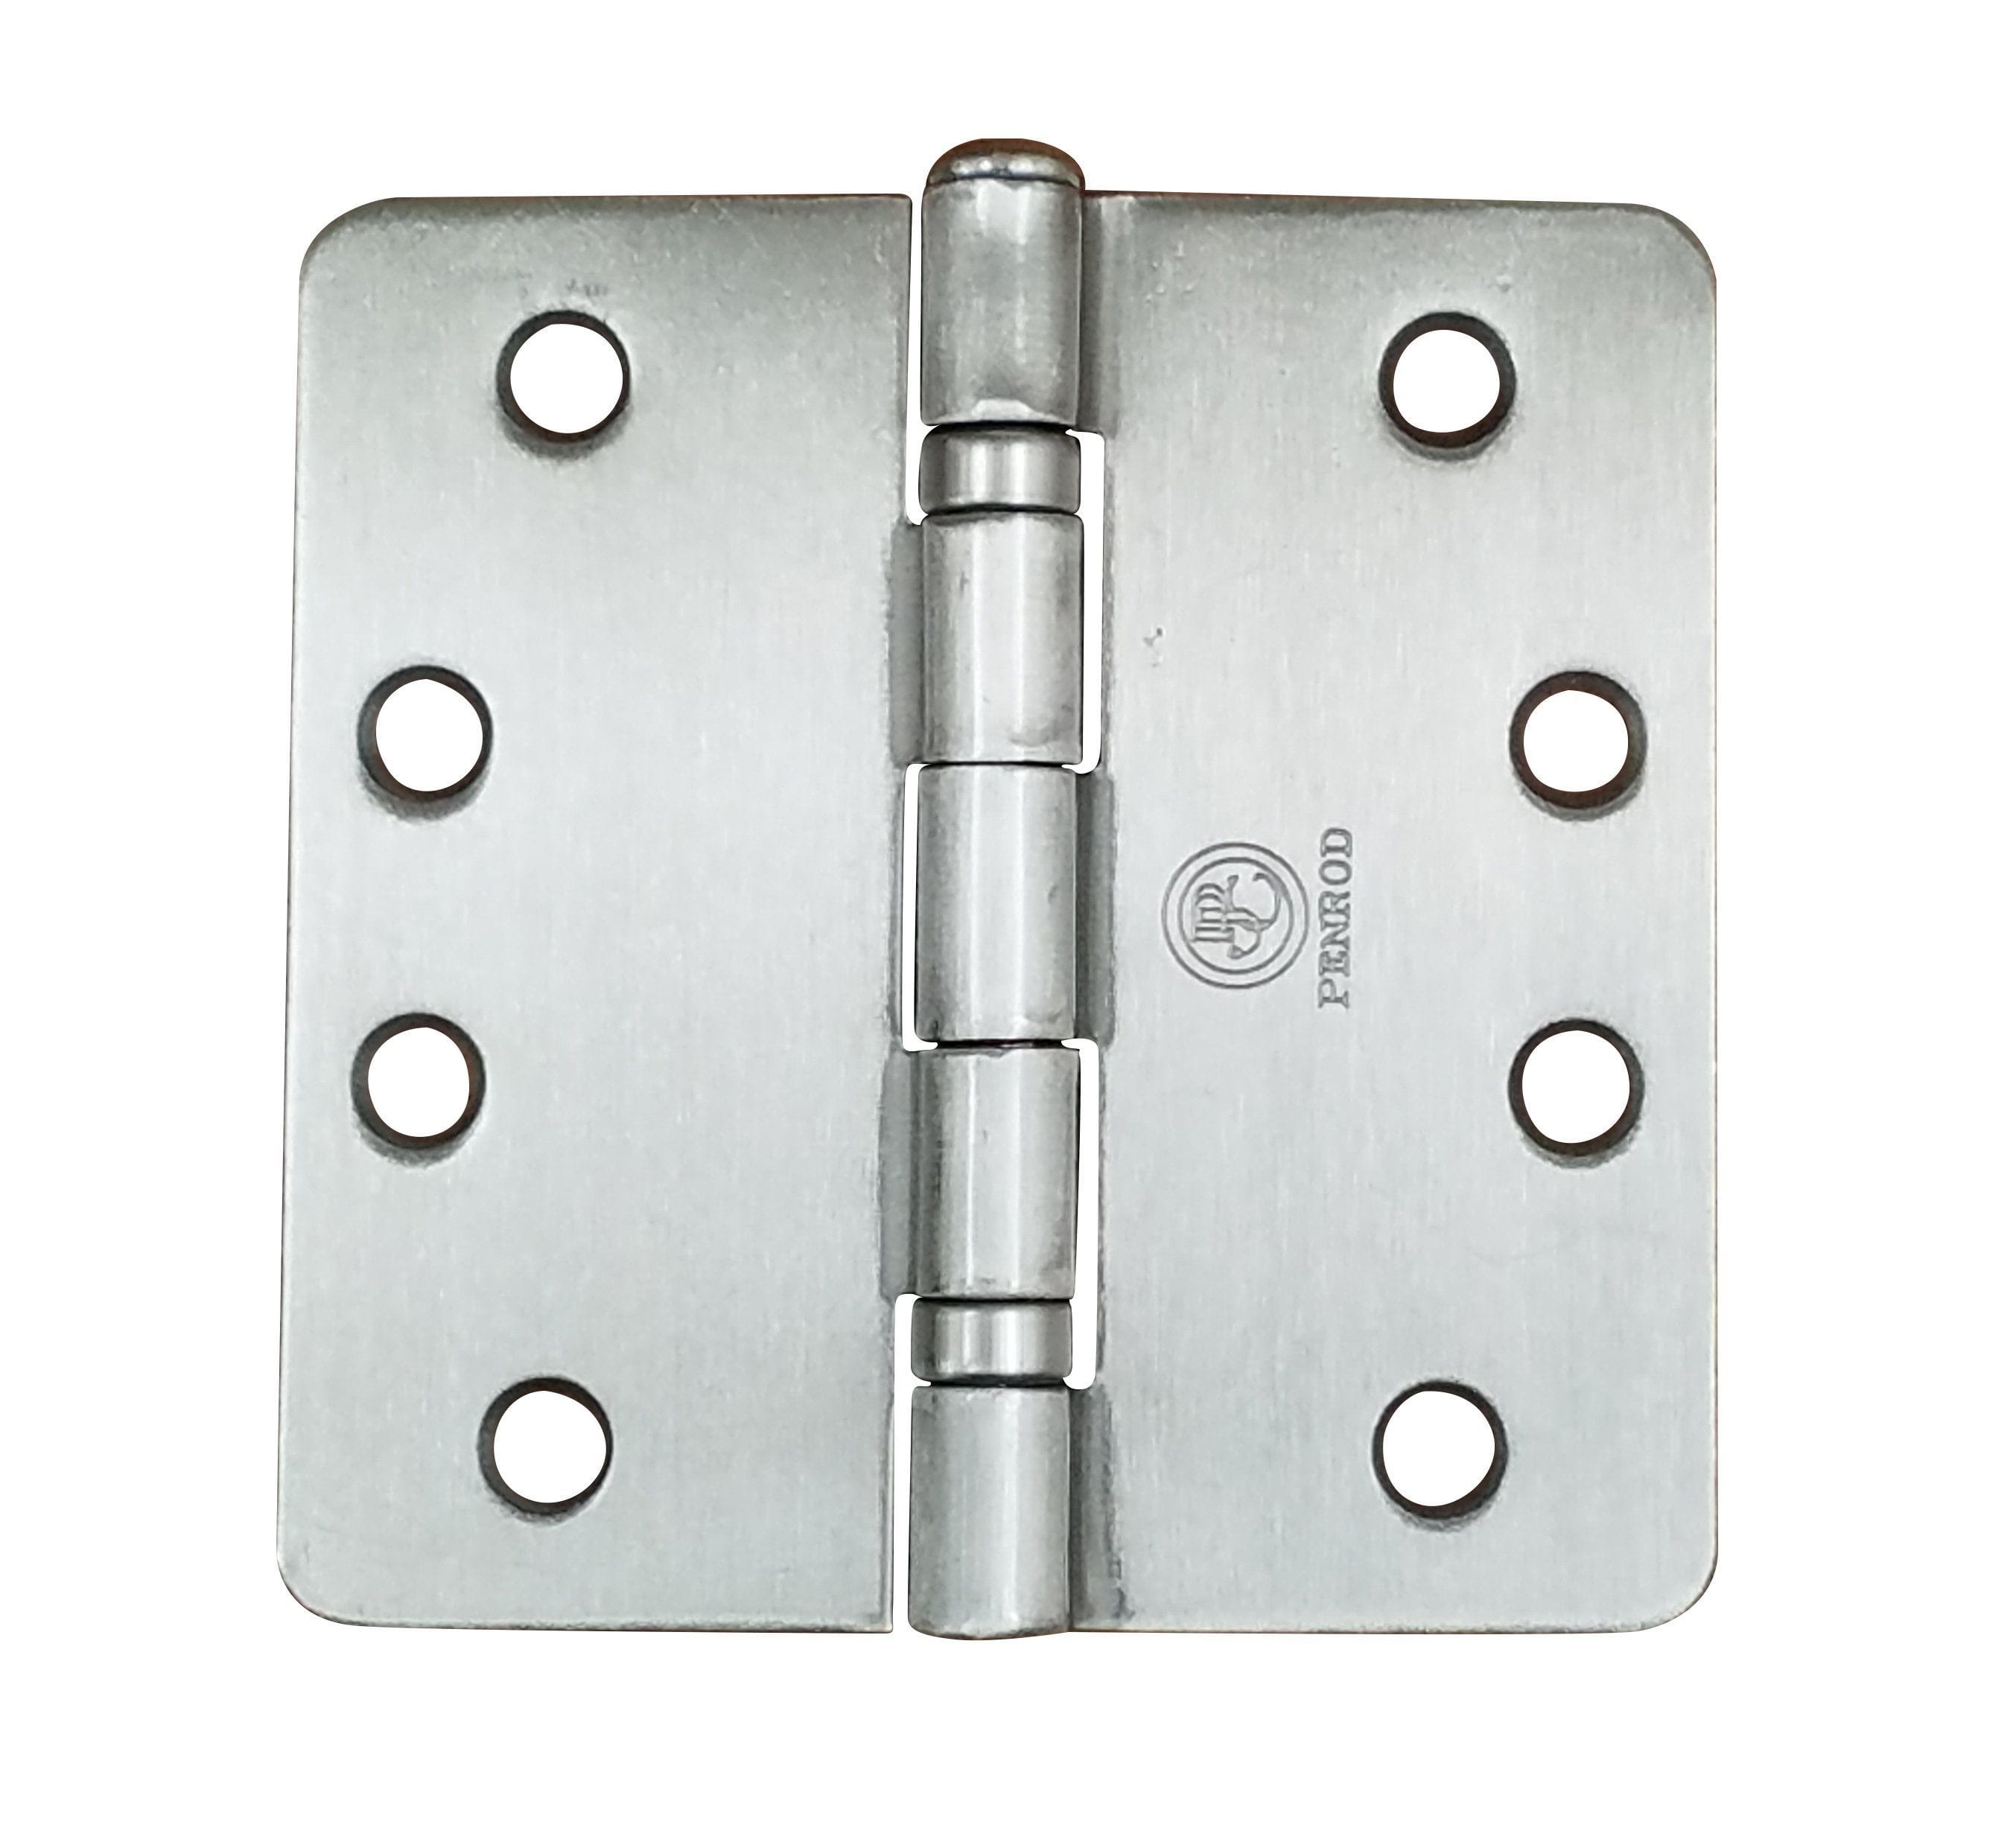 Ball Bearing Door Hinges 4 With 1 4 Radius Corners Template Timely Arch Hole Pattern Multiple Finishes 3 Pack